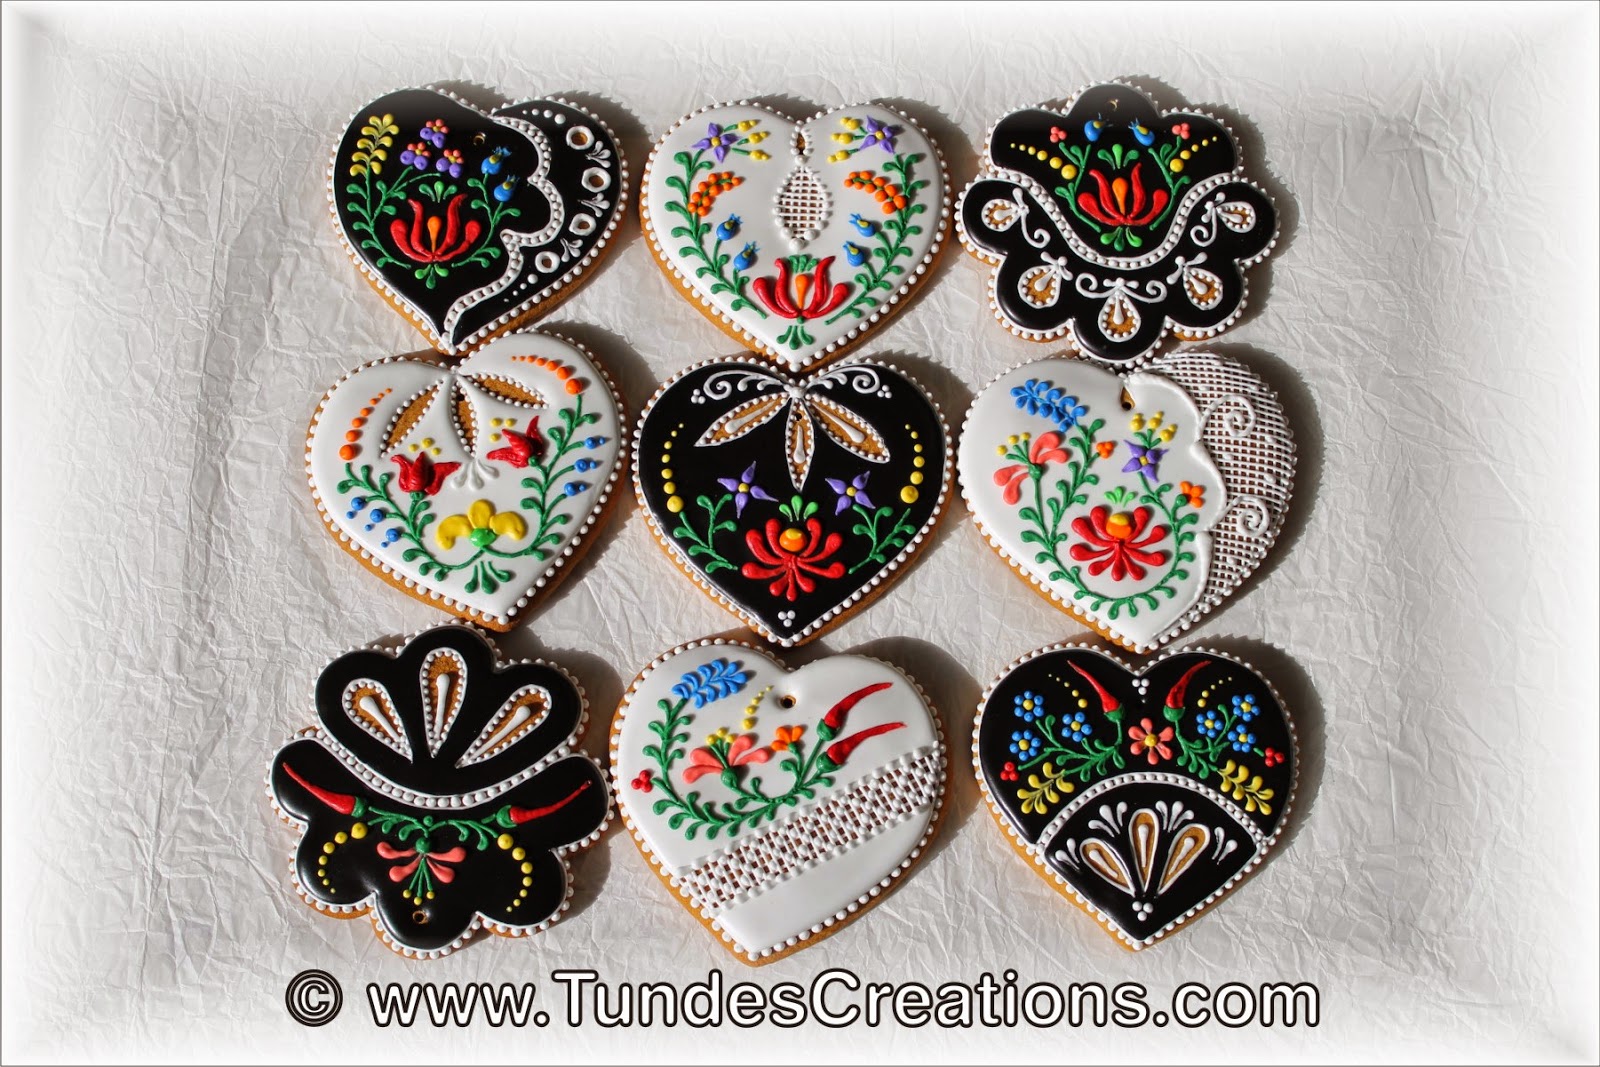 Gingerbread cookies with Hungarian folk art pattern